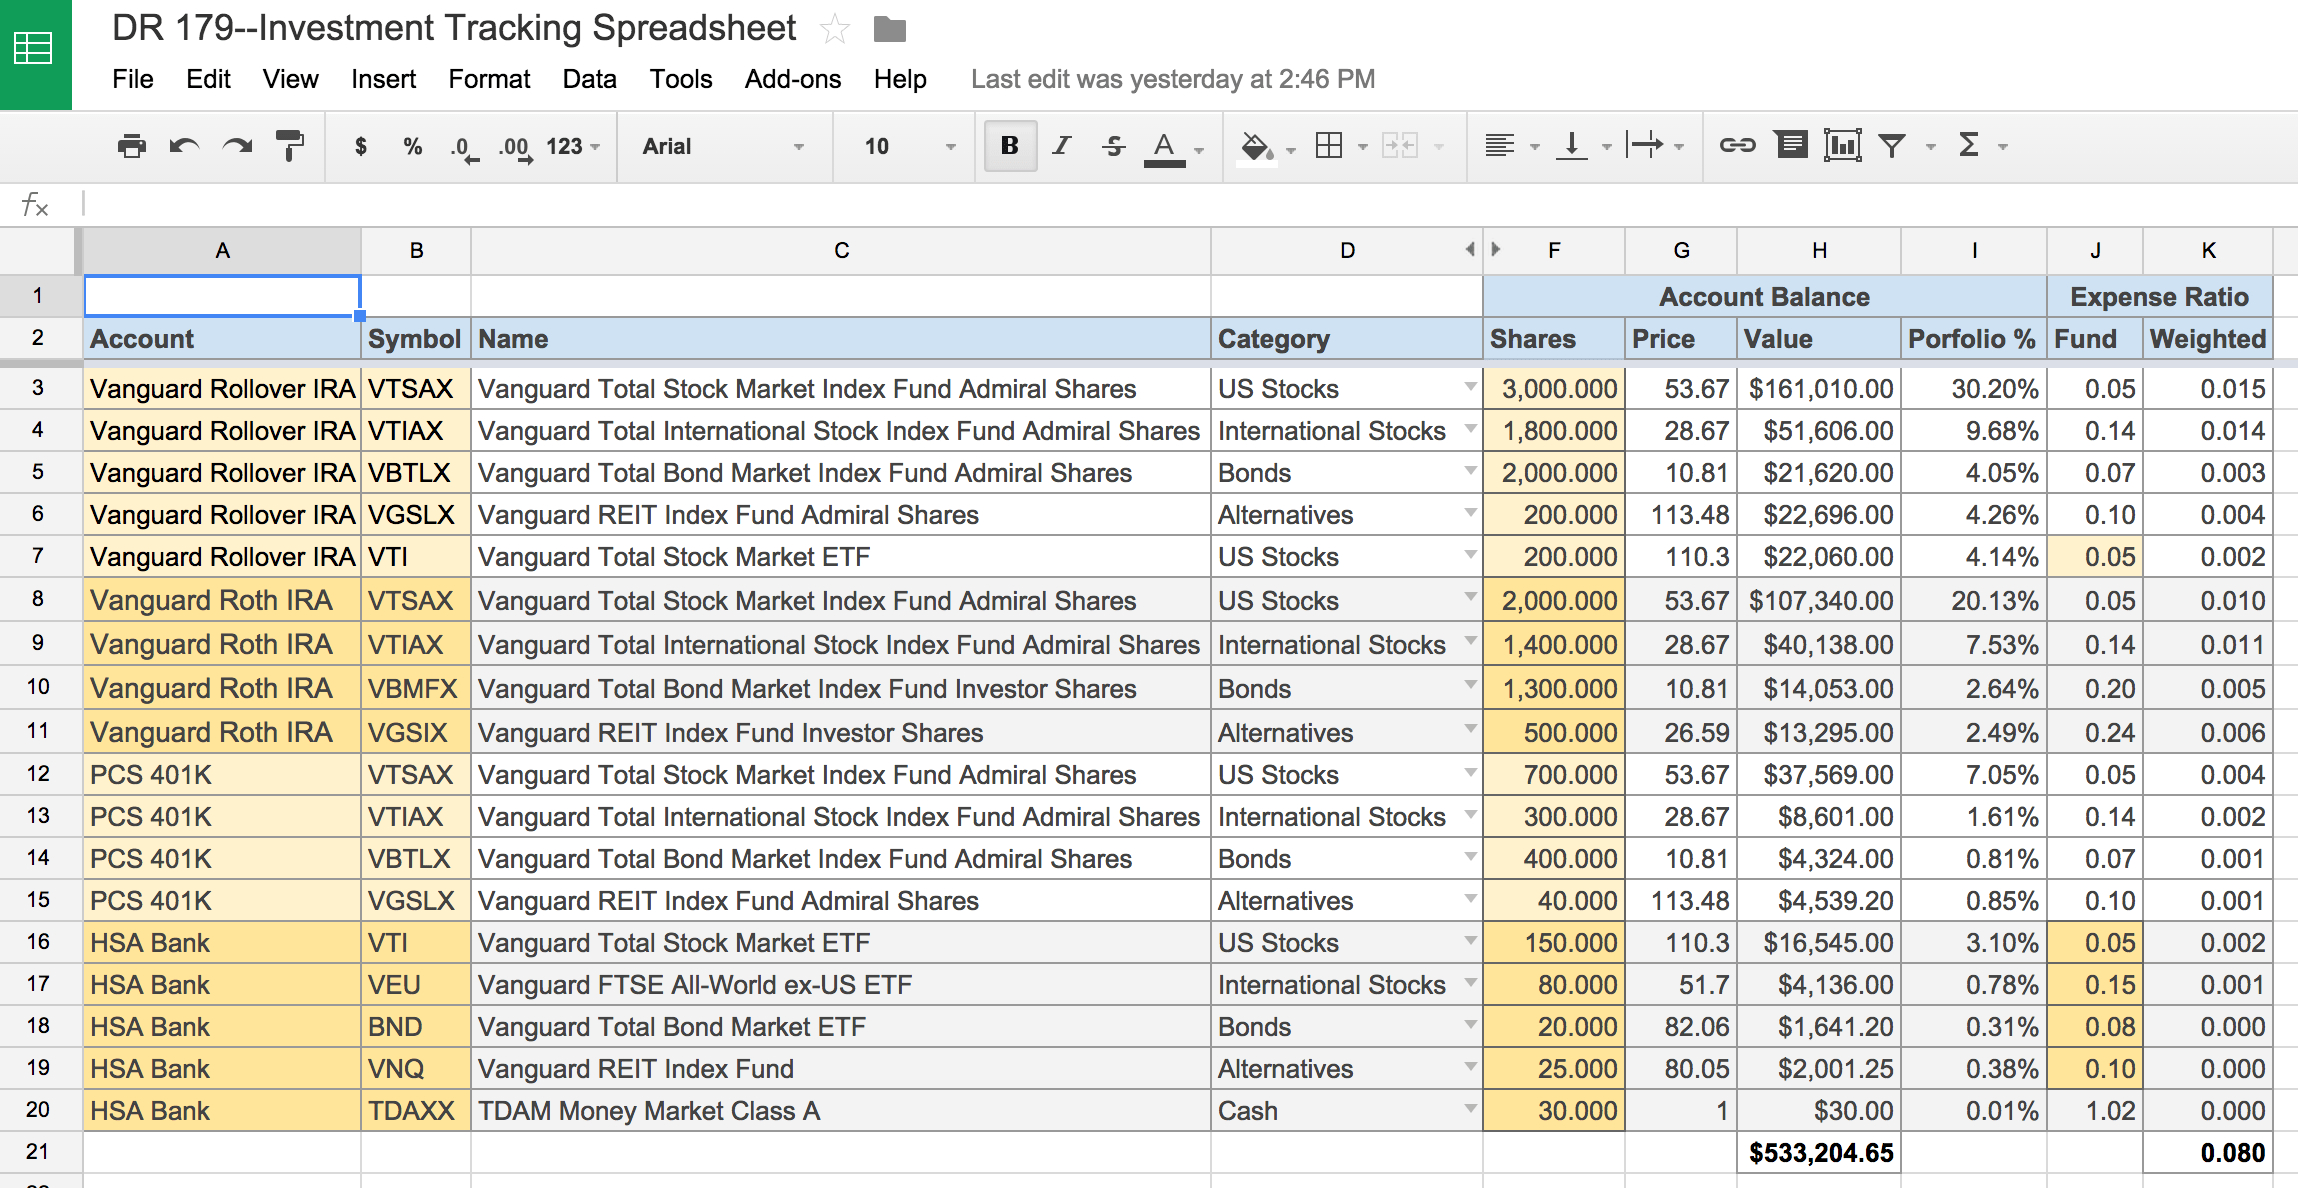 Cd Ladder Excel Spreadsheet throughout An Awesome And Free Investment Tracking Spreadsheet